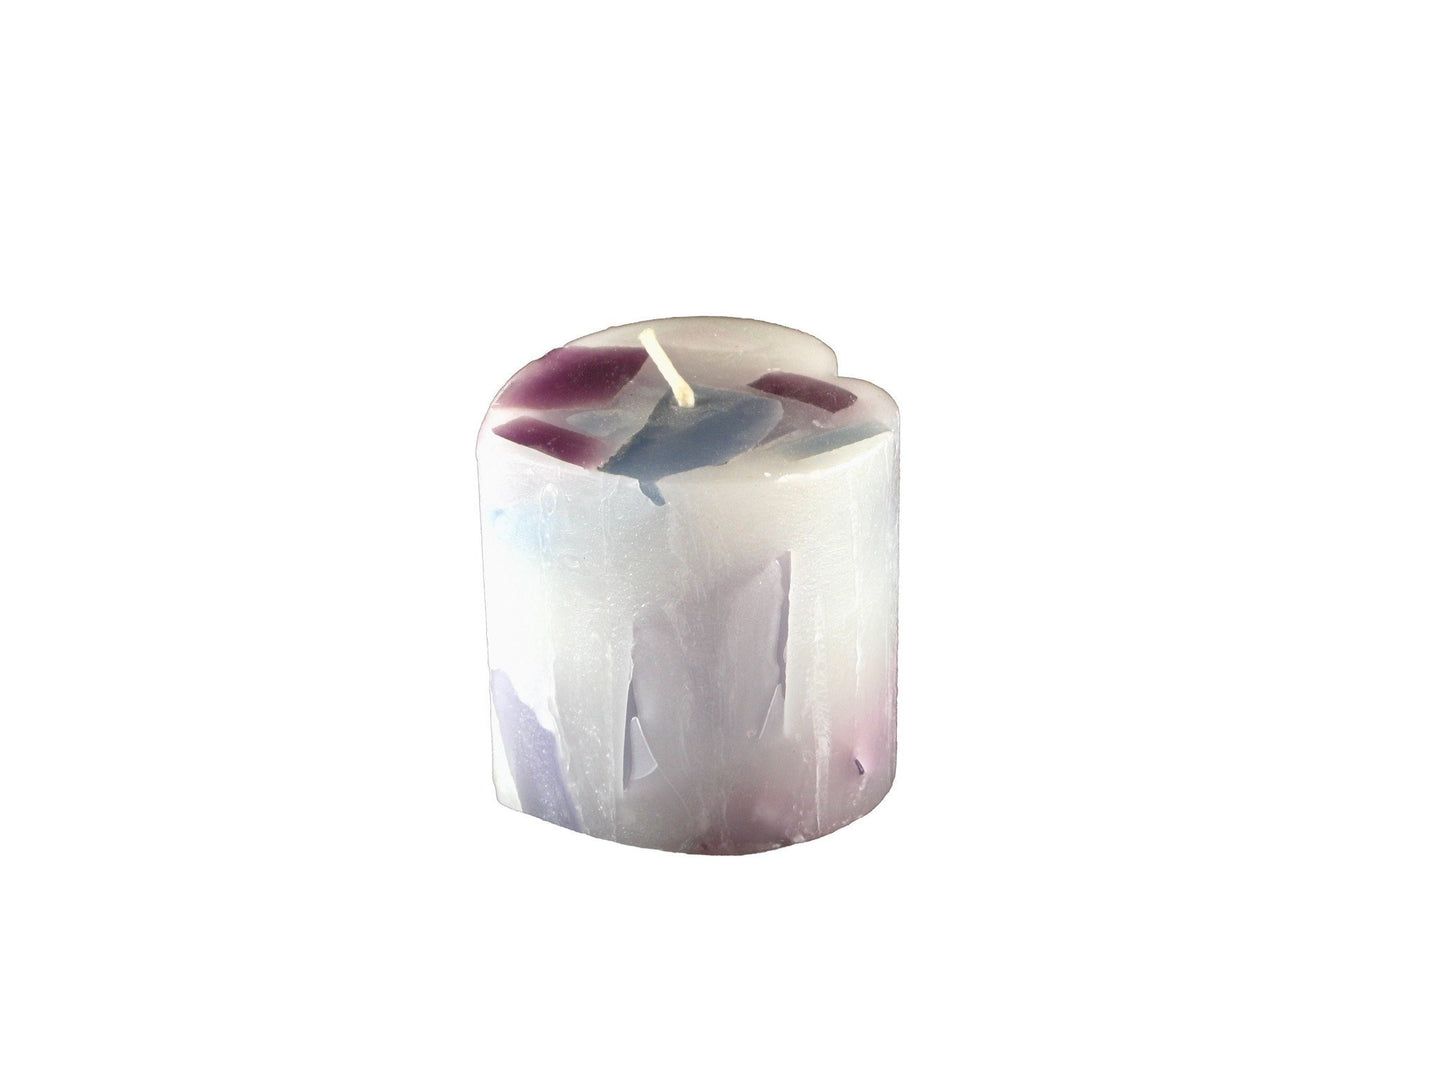 Heart (Small), 2 3/4D x 2 3/4"H, Glimmers & Shimmers, 6 colour patterns, fragrance free - Fanny Bay Candle Company